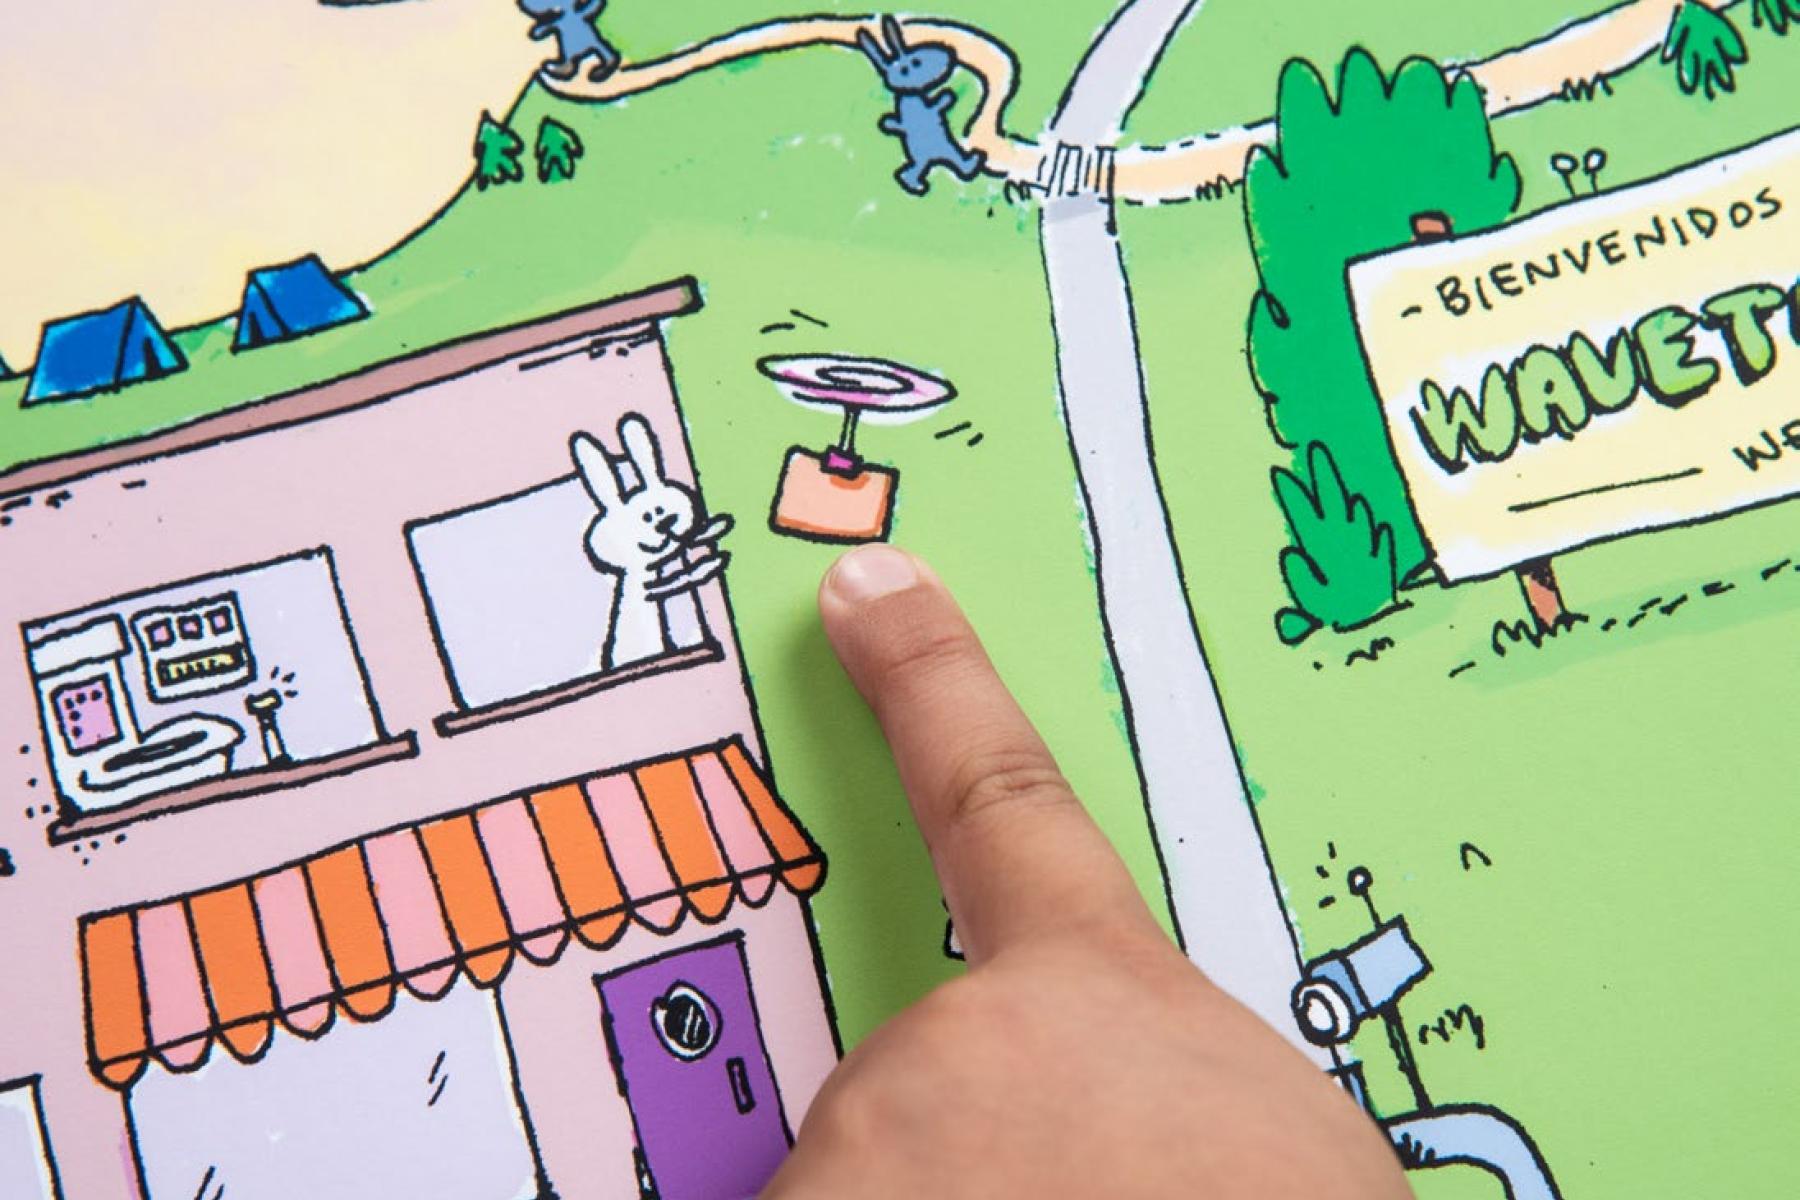 A finger points to a flying drone on the Wavetown illustration.